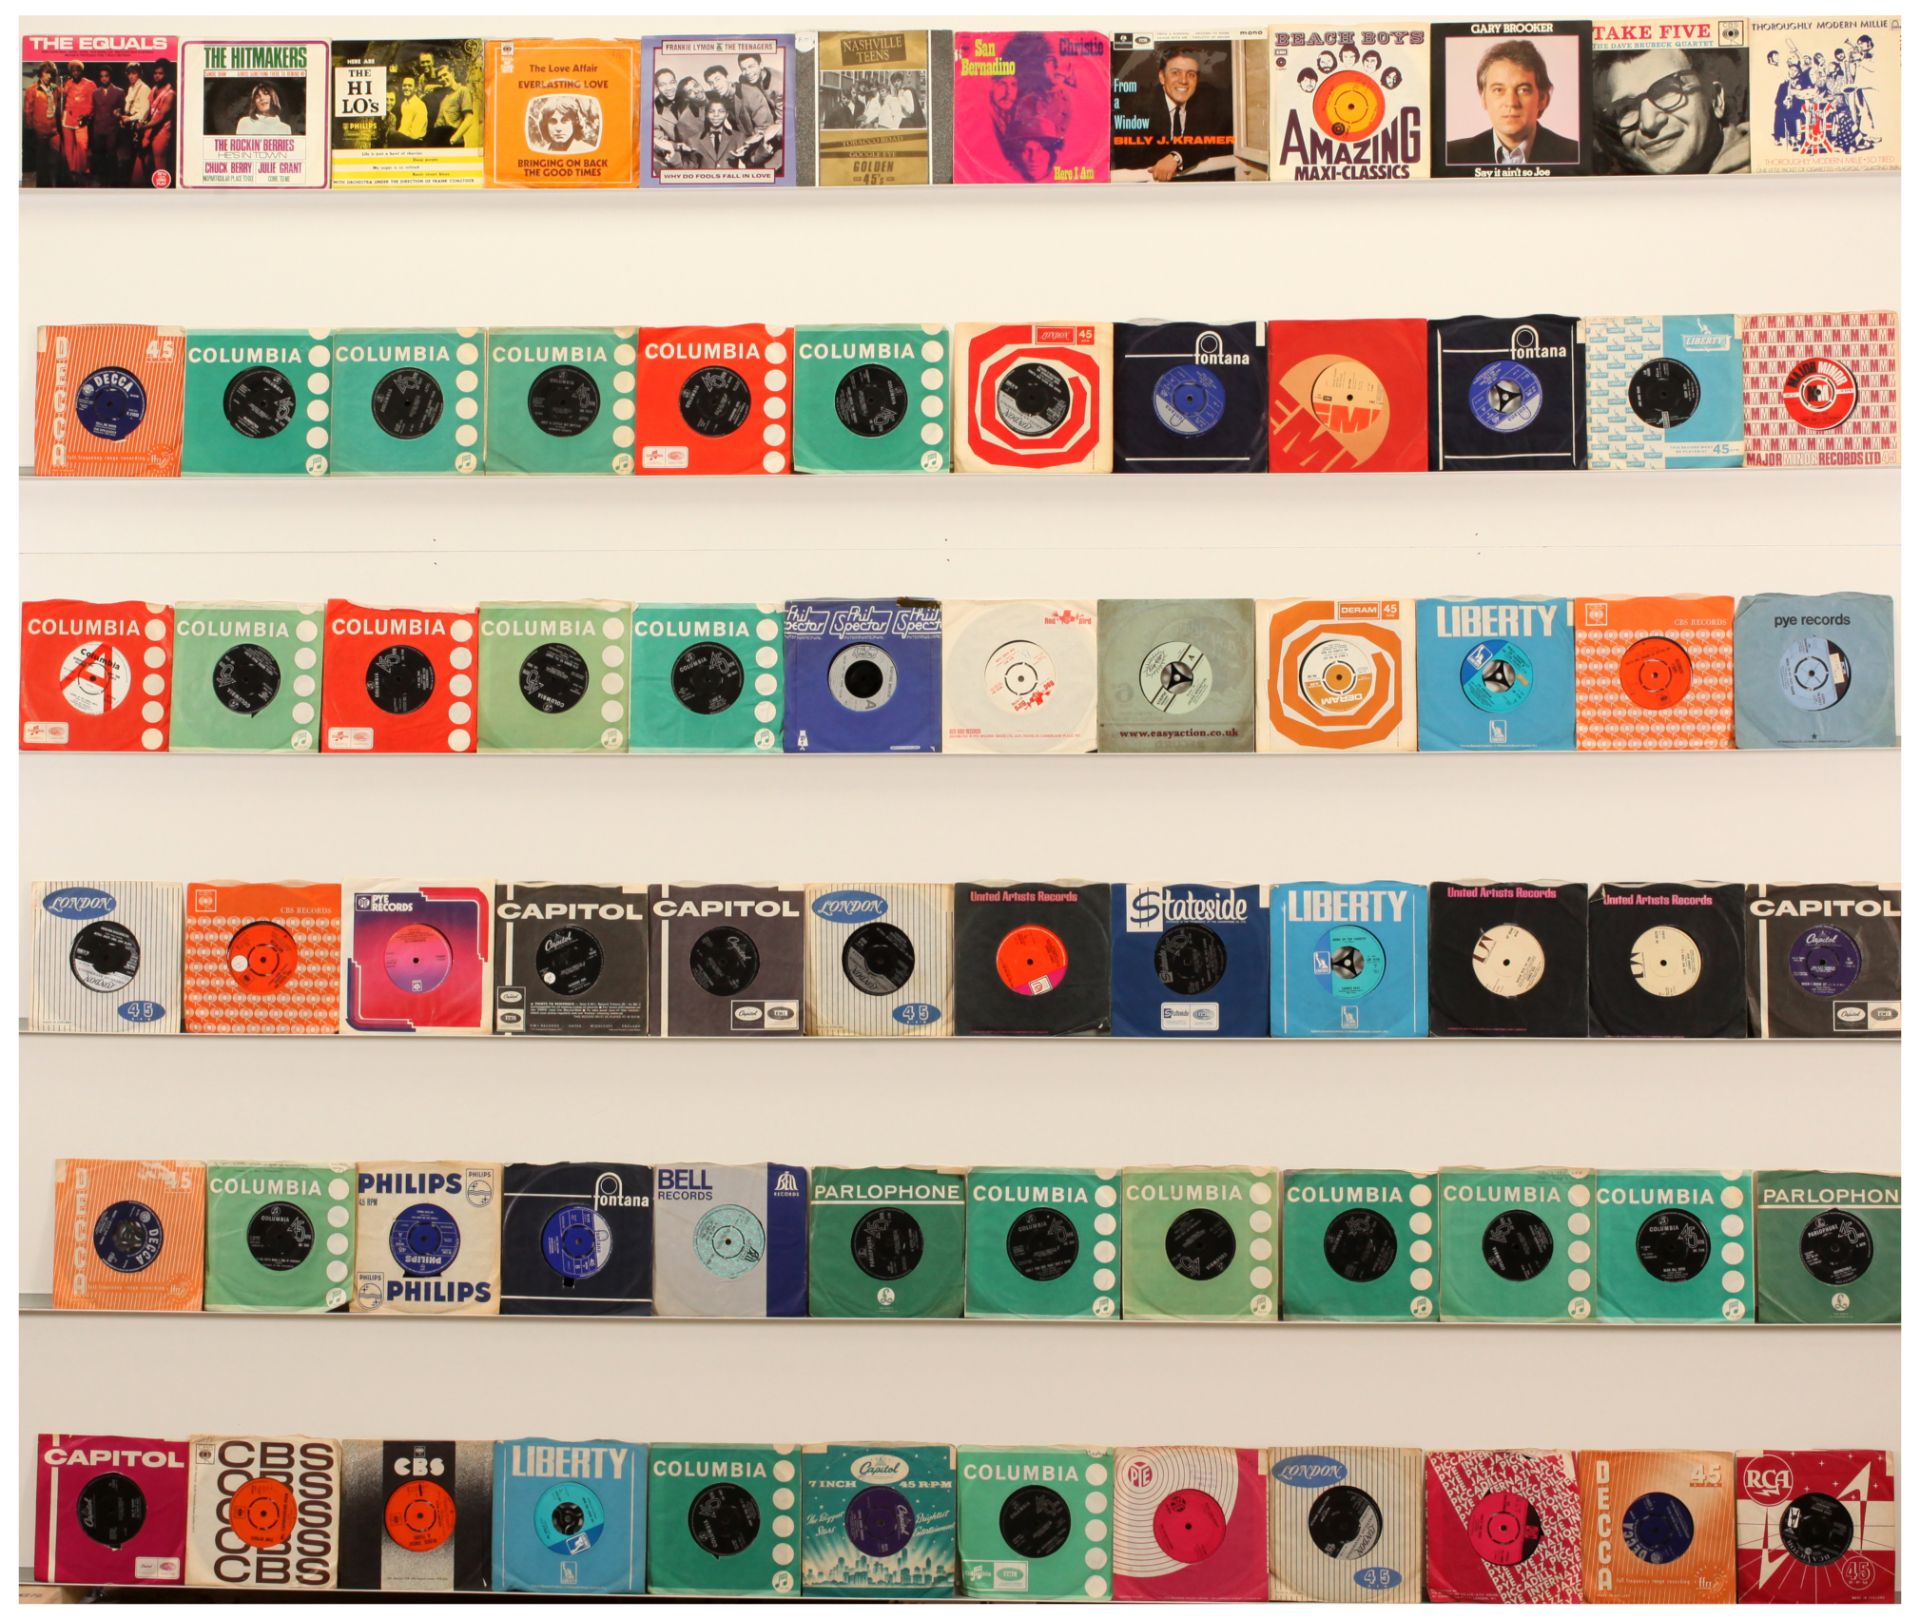 Rock/Pop 7" Singles Mainly by Artists of the 1950s/1960s